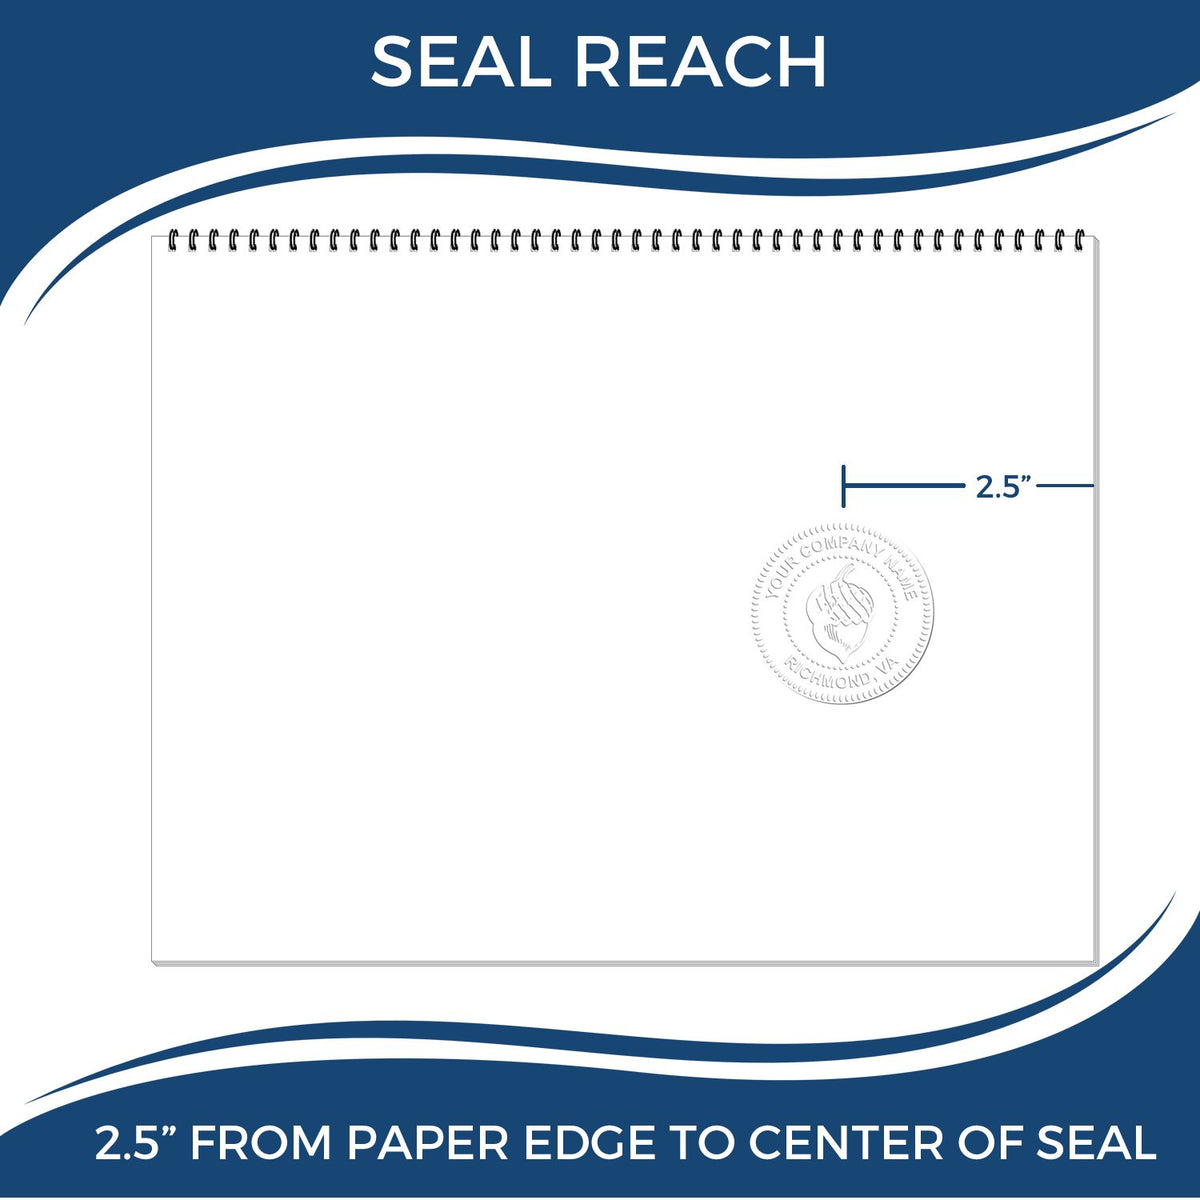 An infographic showing the seal reach which is represented by a ruler and a miniature seal image of the Heavy Duty Cast Iron Kentucky Geologist Seal Embosser